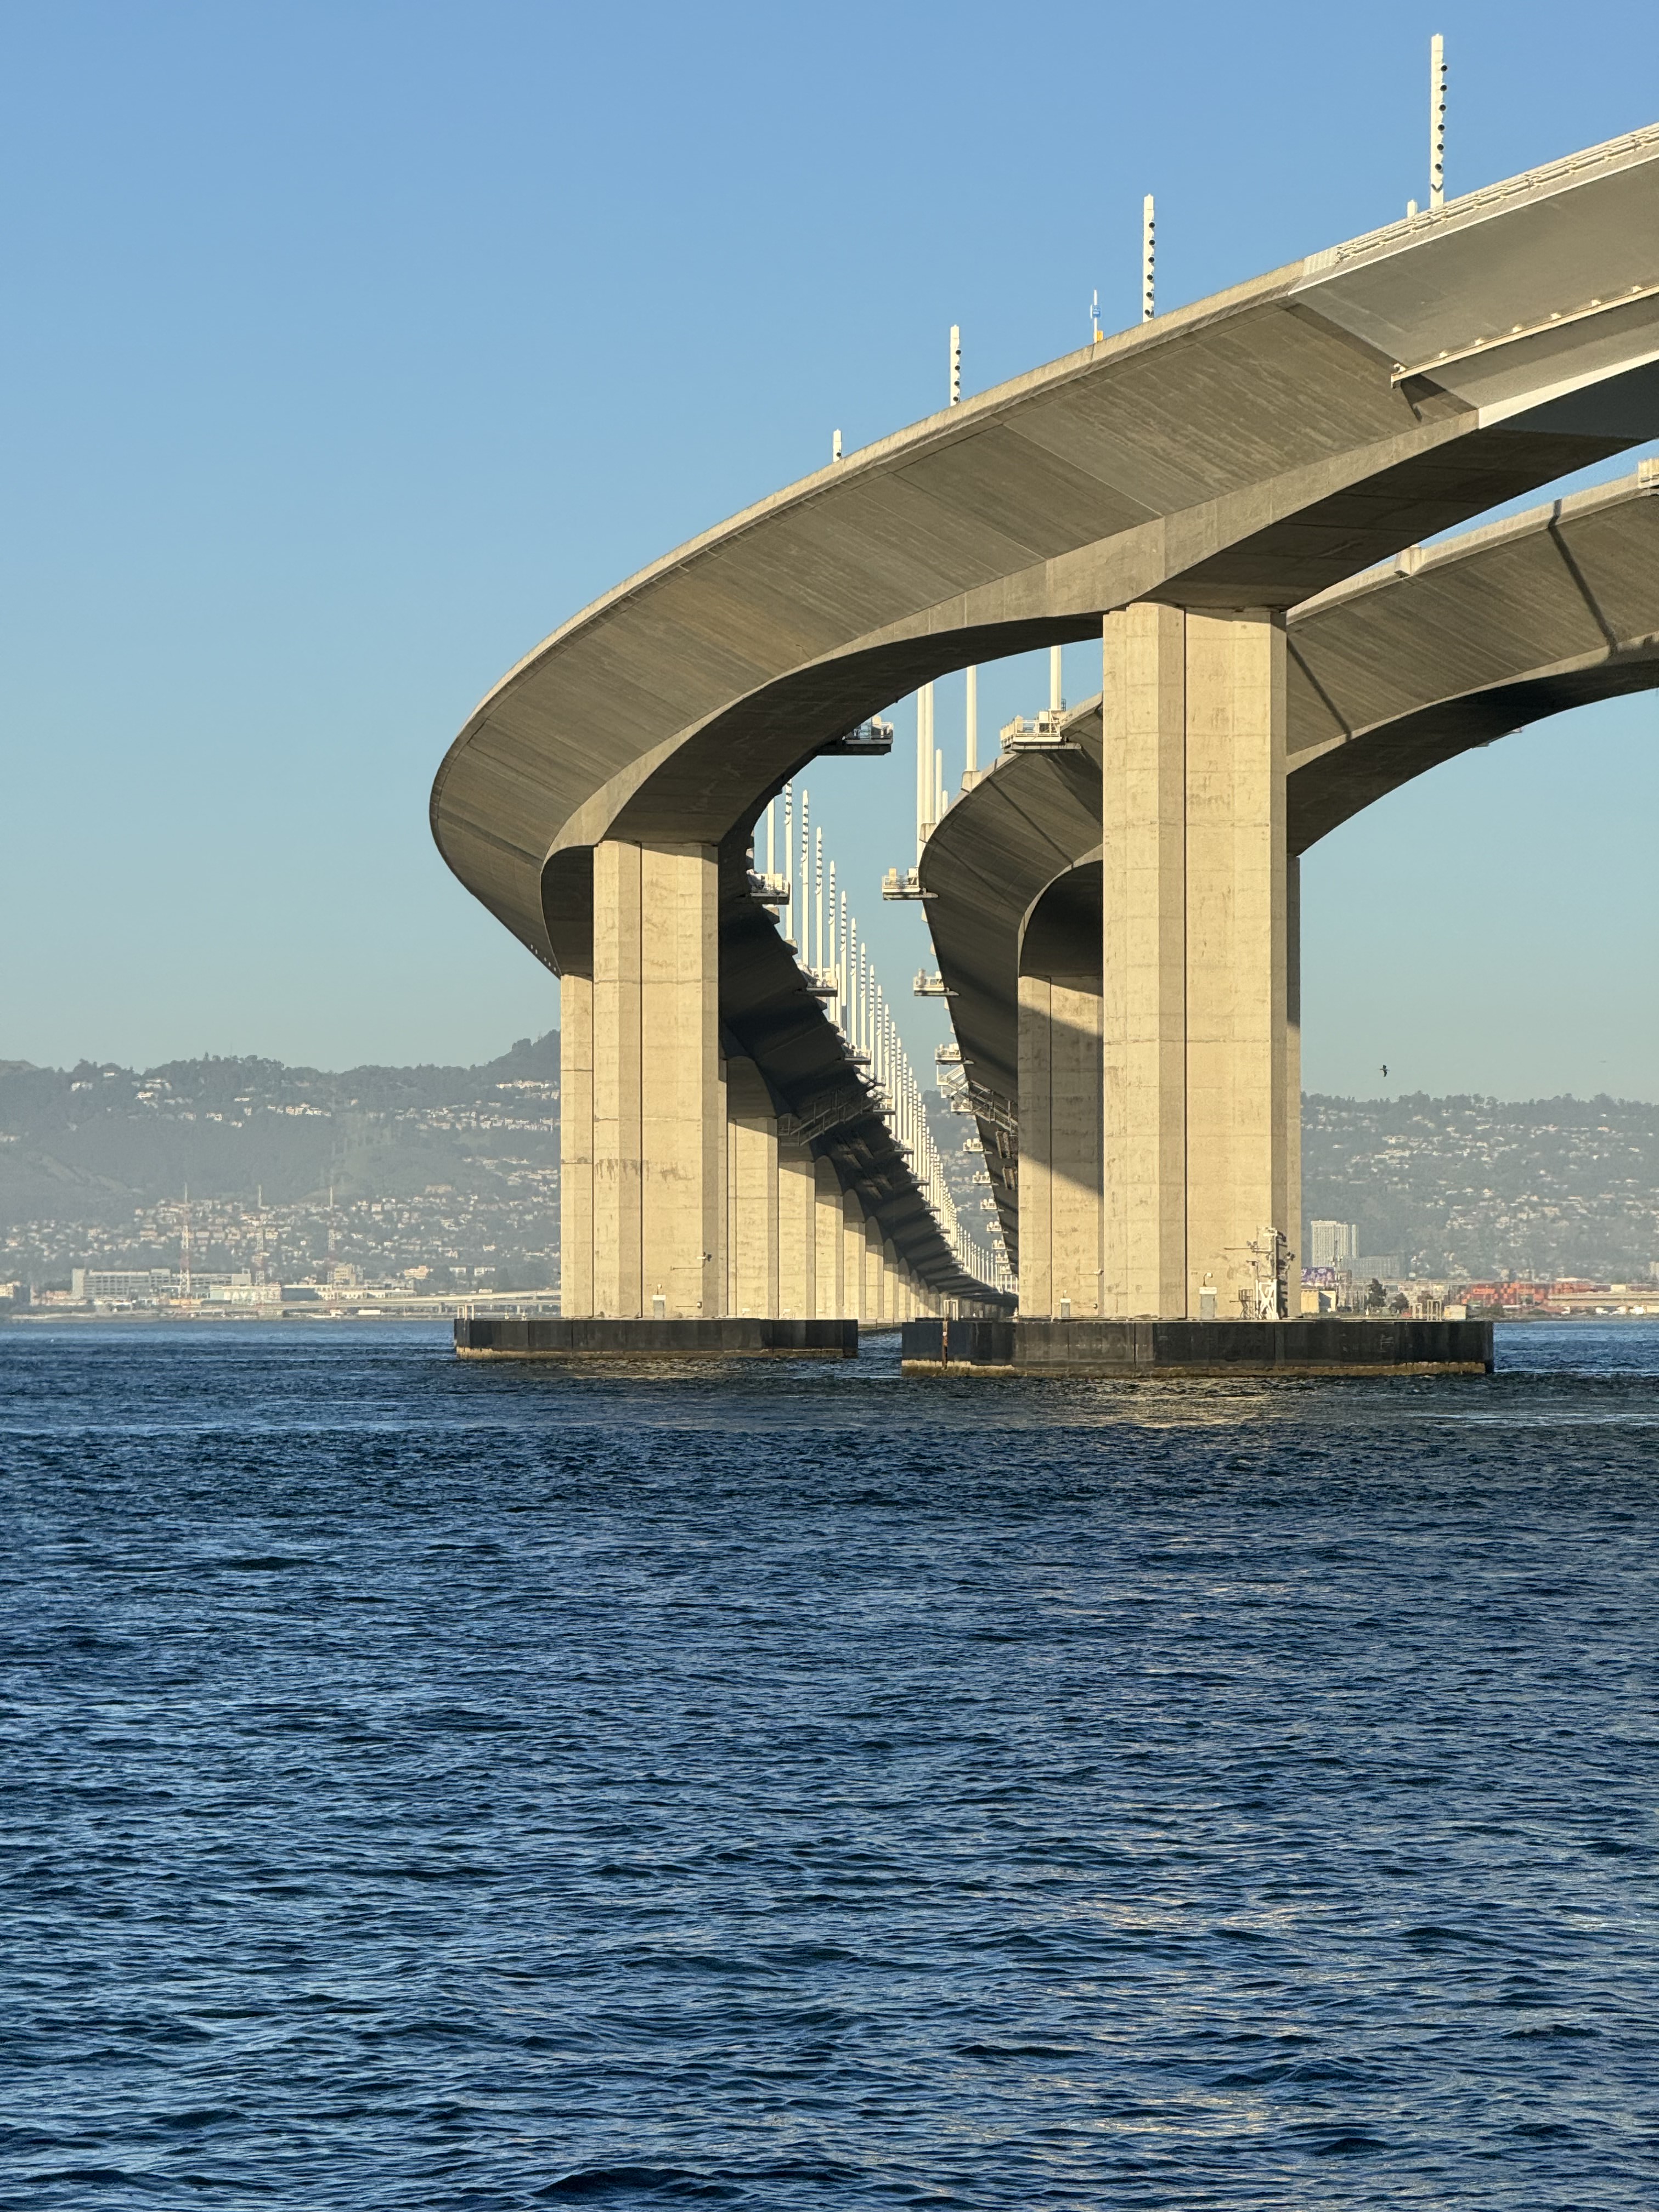 A view of the Oakland Bay Bridge from the water.